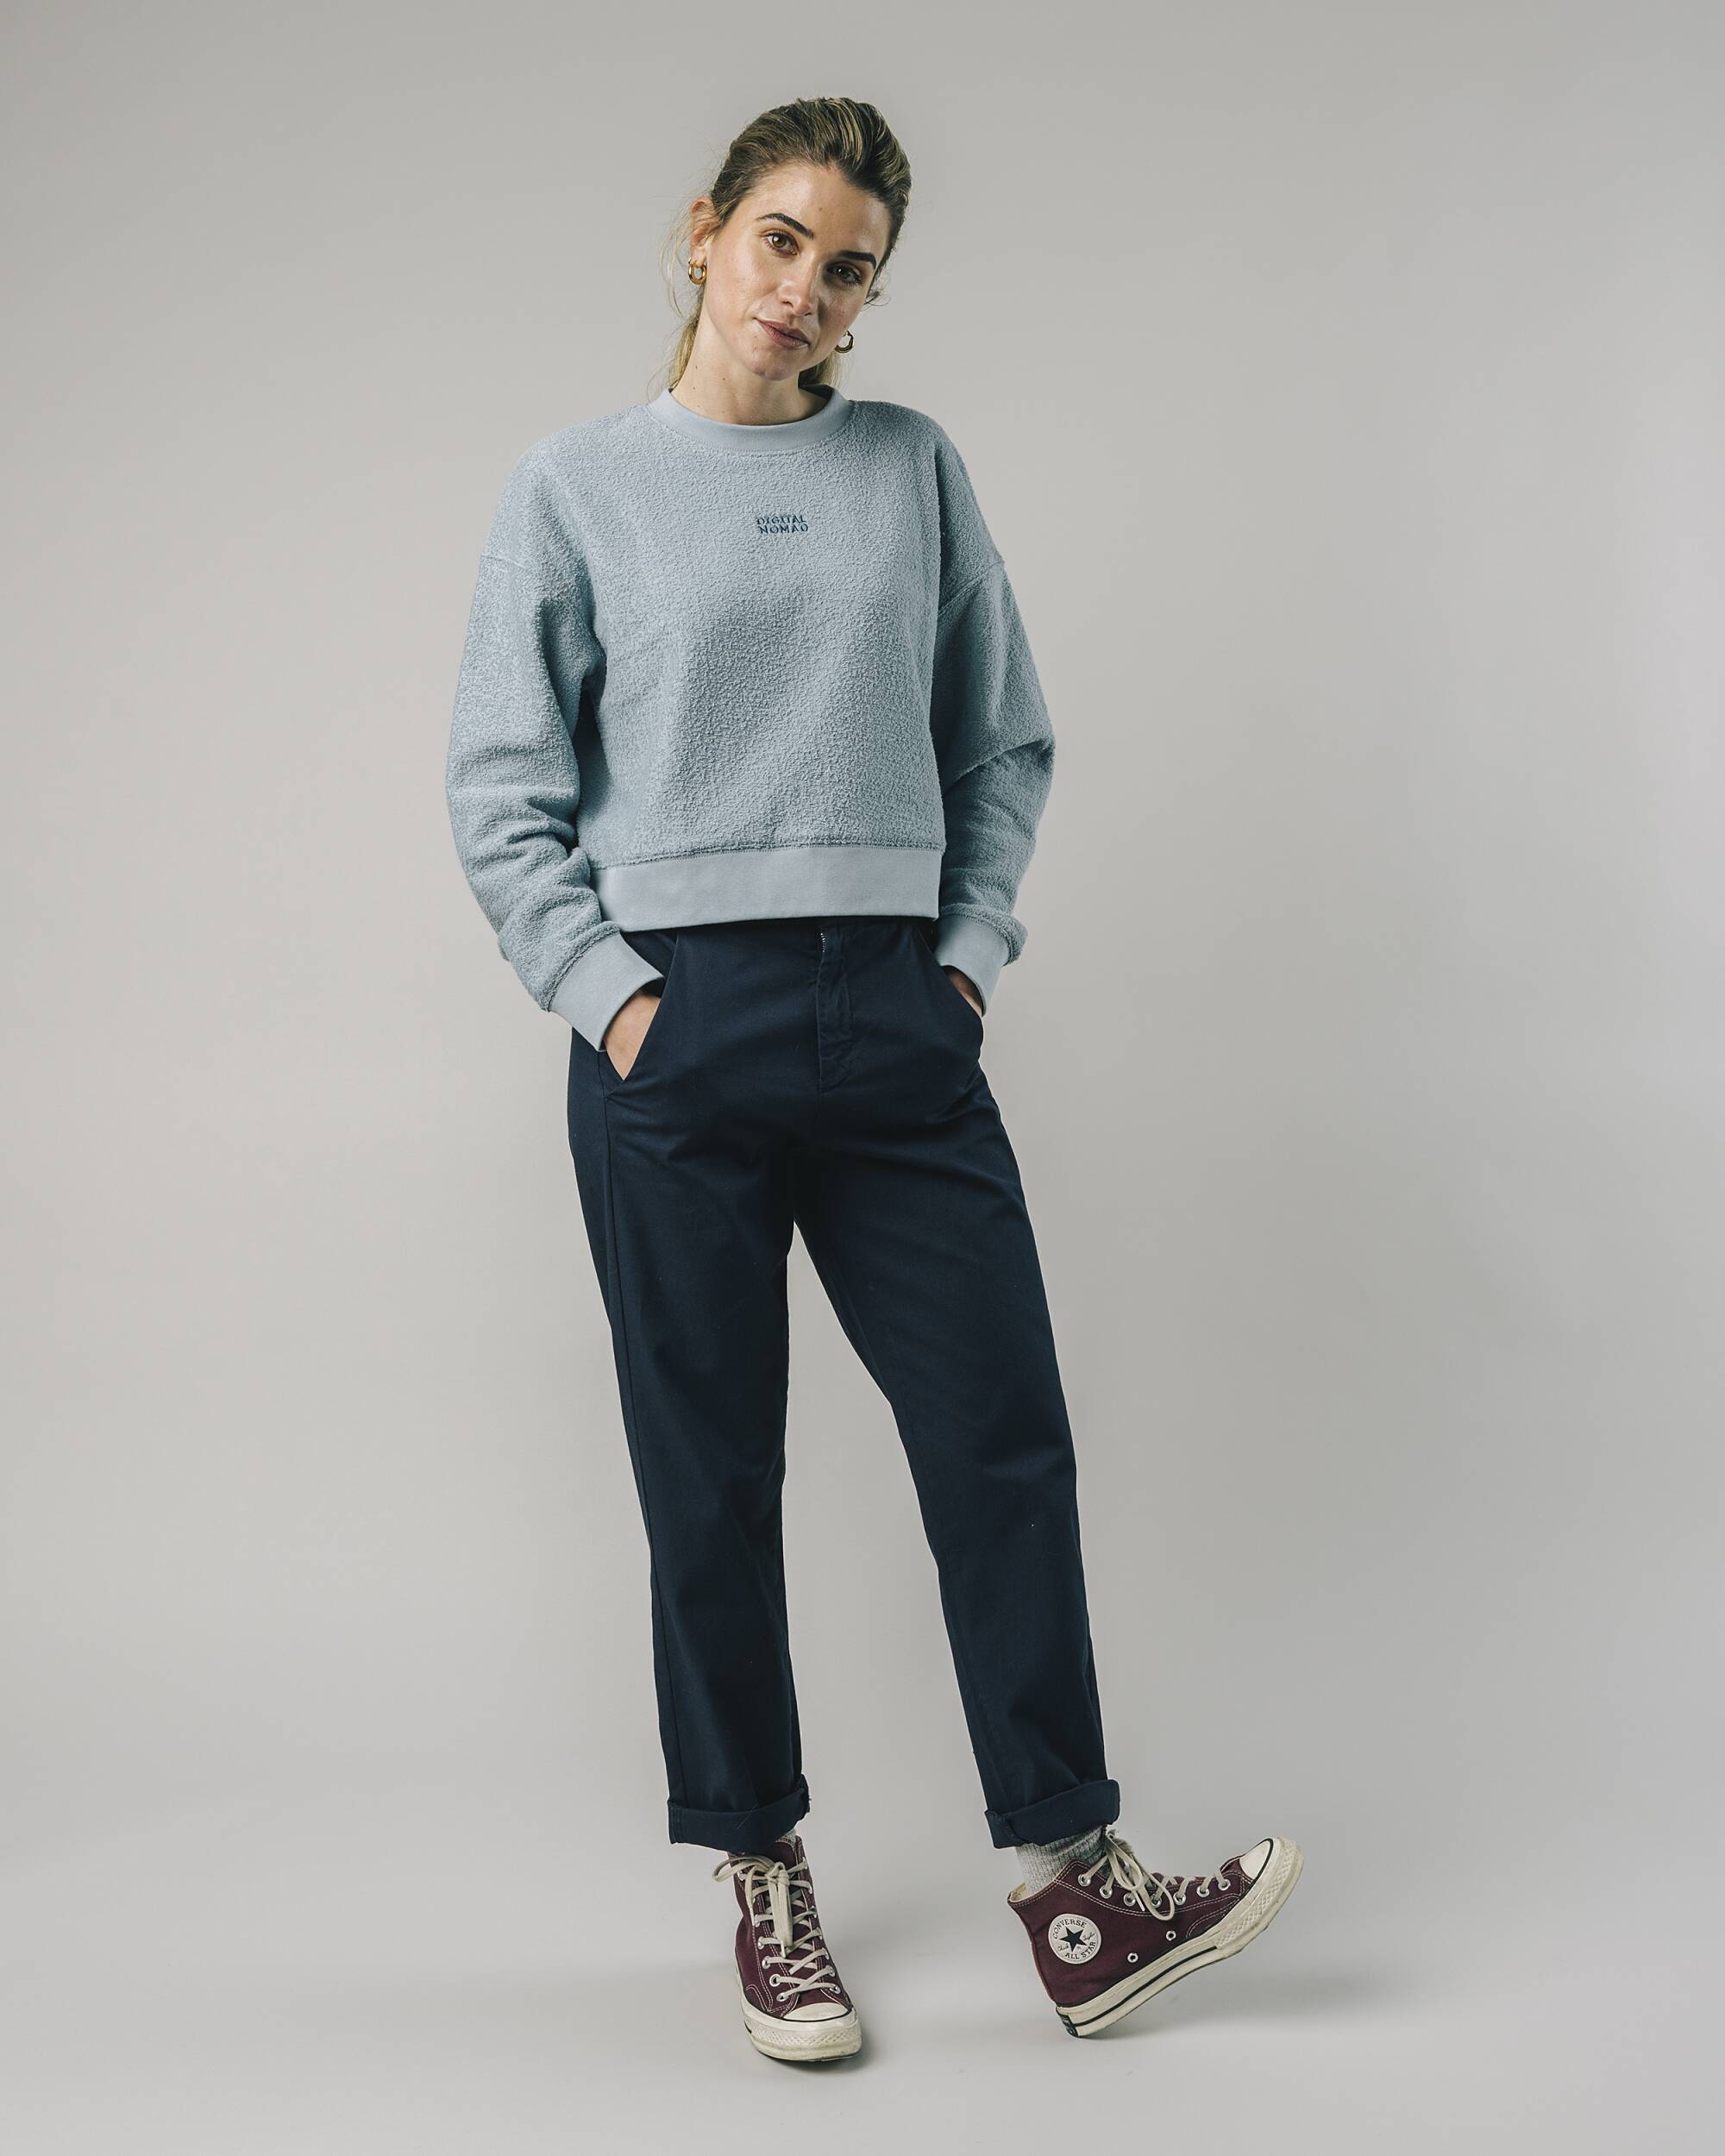 Sweatshirt "Nomad Terry" in Stone Blue / blue made from 100% organic cotton from Brava Fabrics